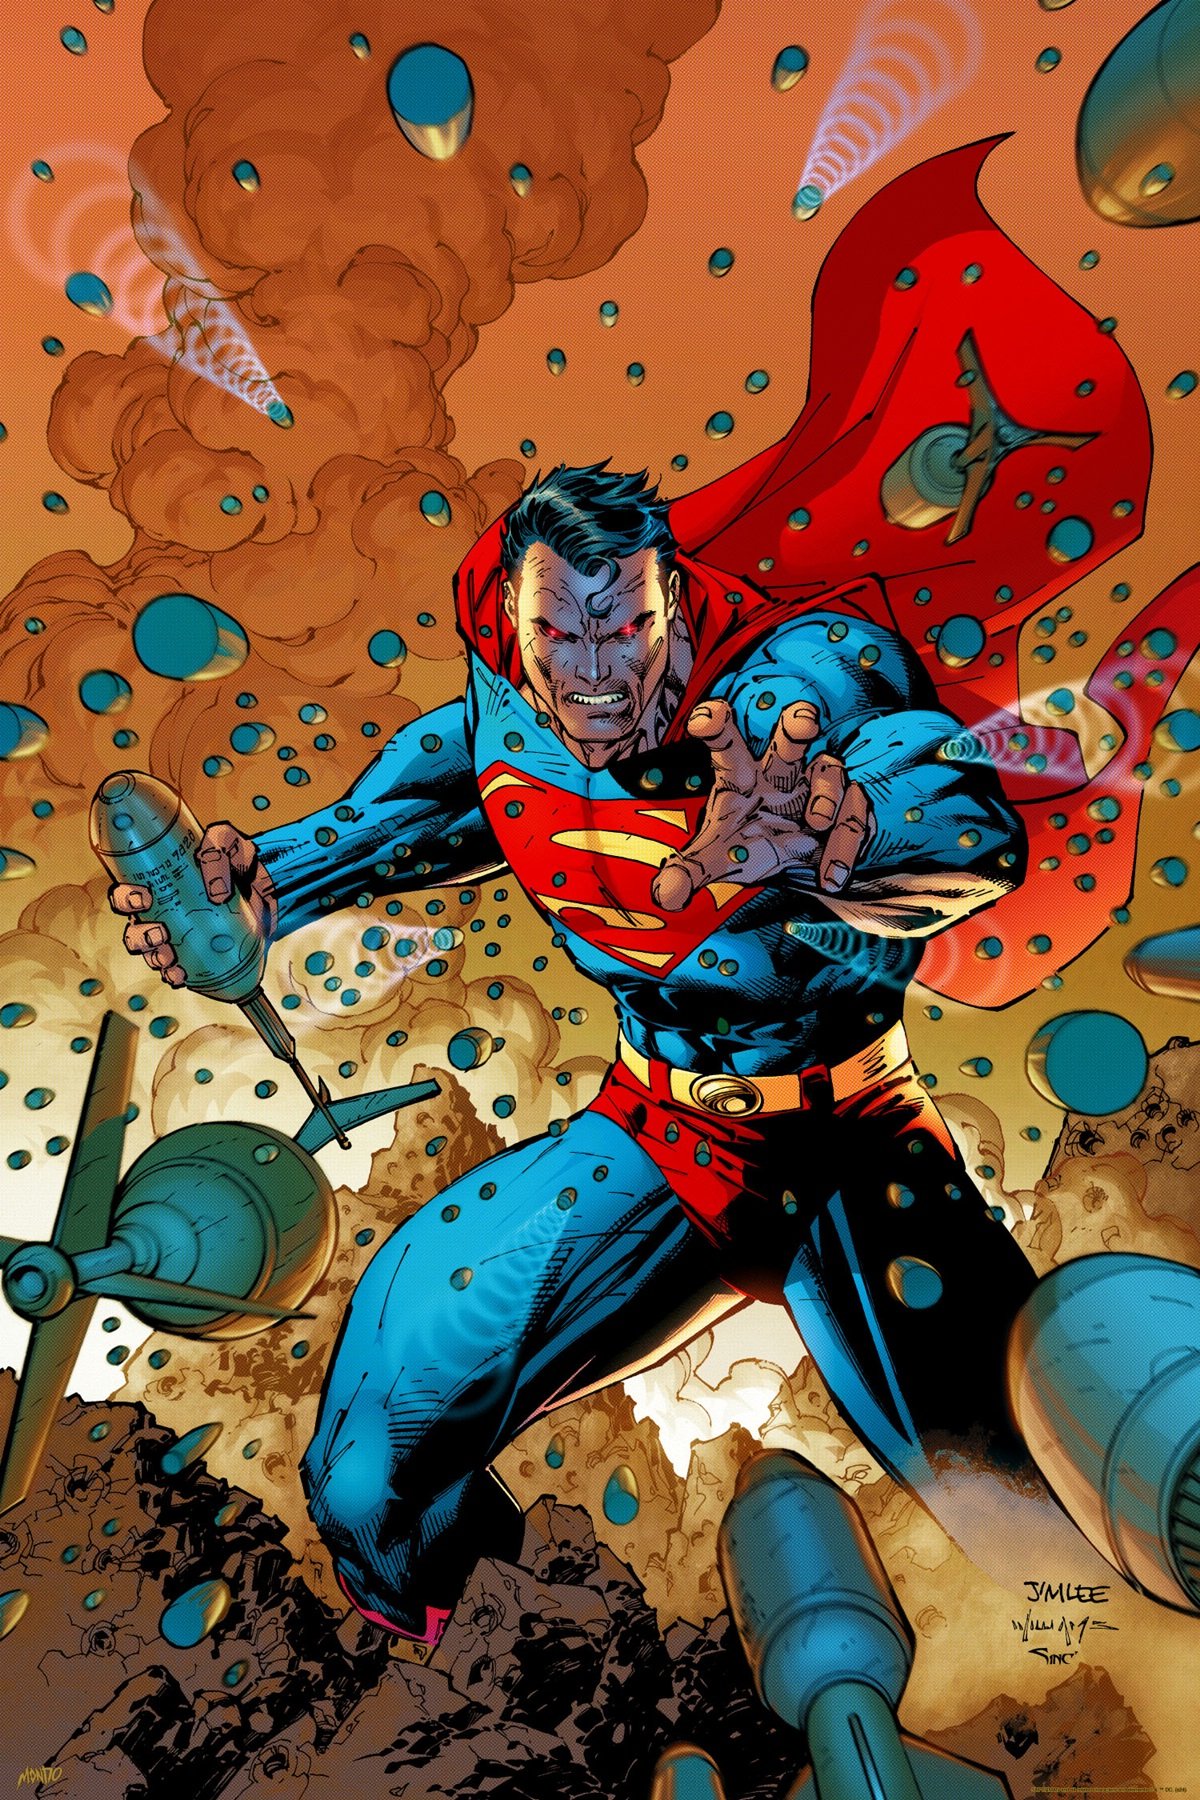 Superman #205 cover art by Jim Lee.